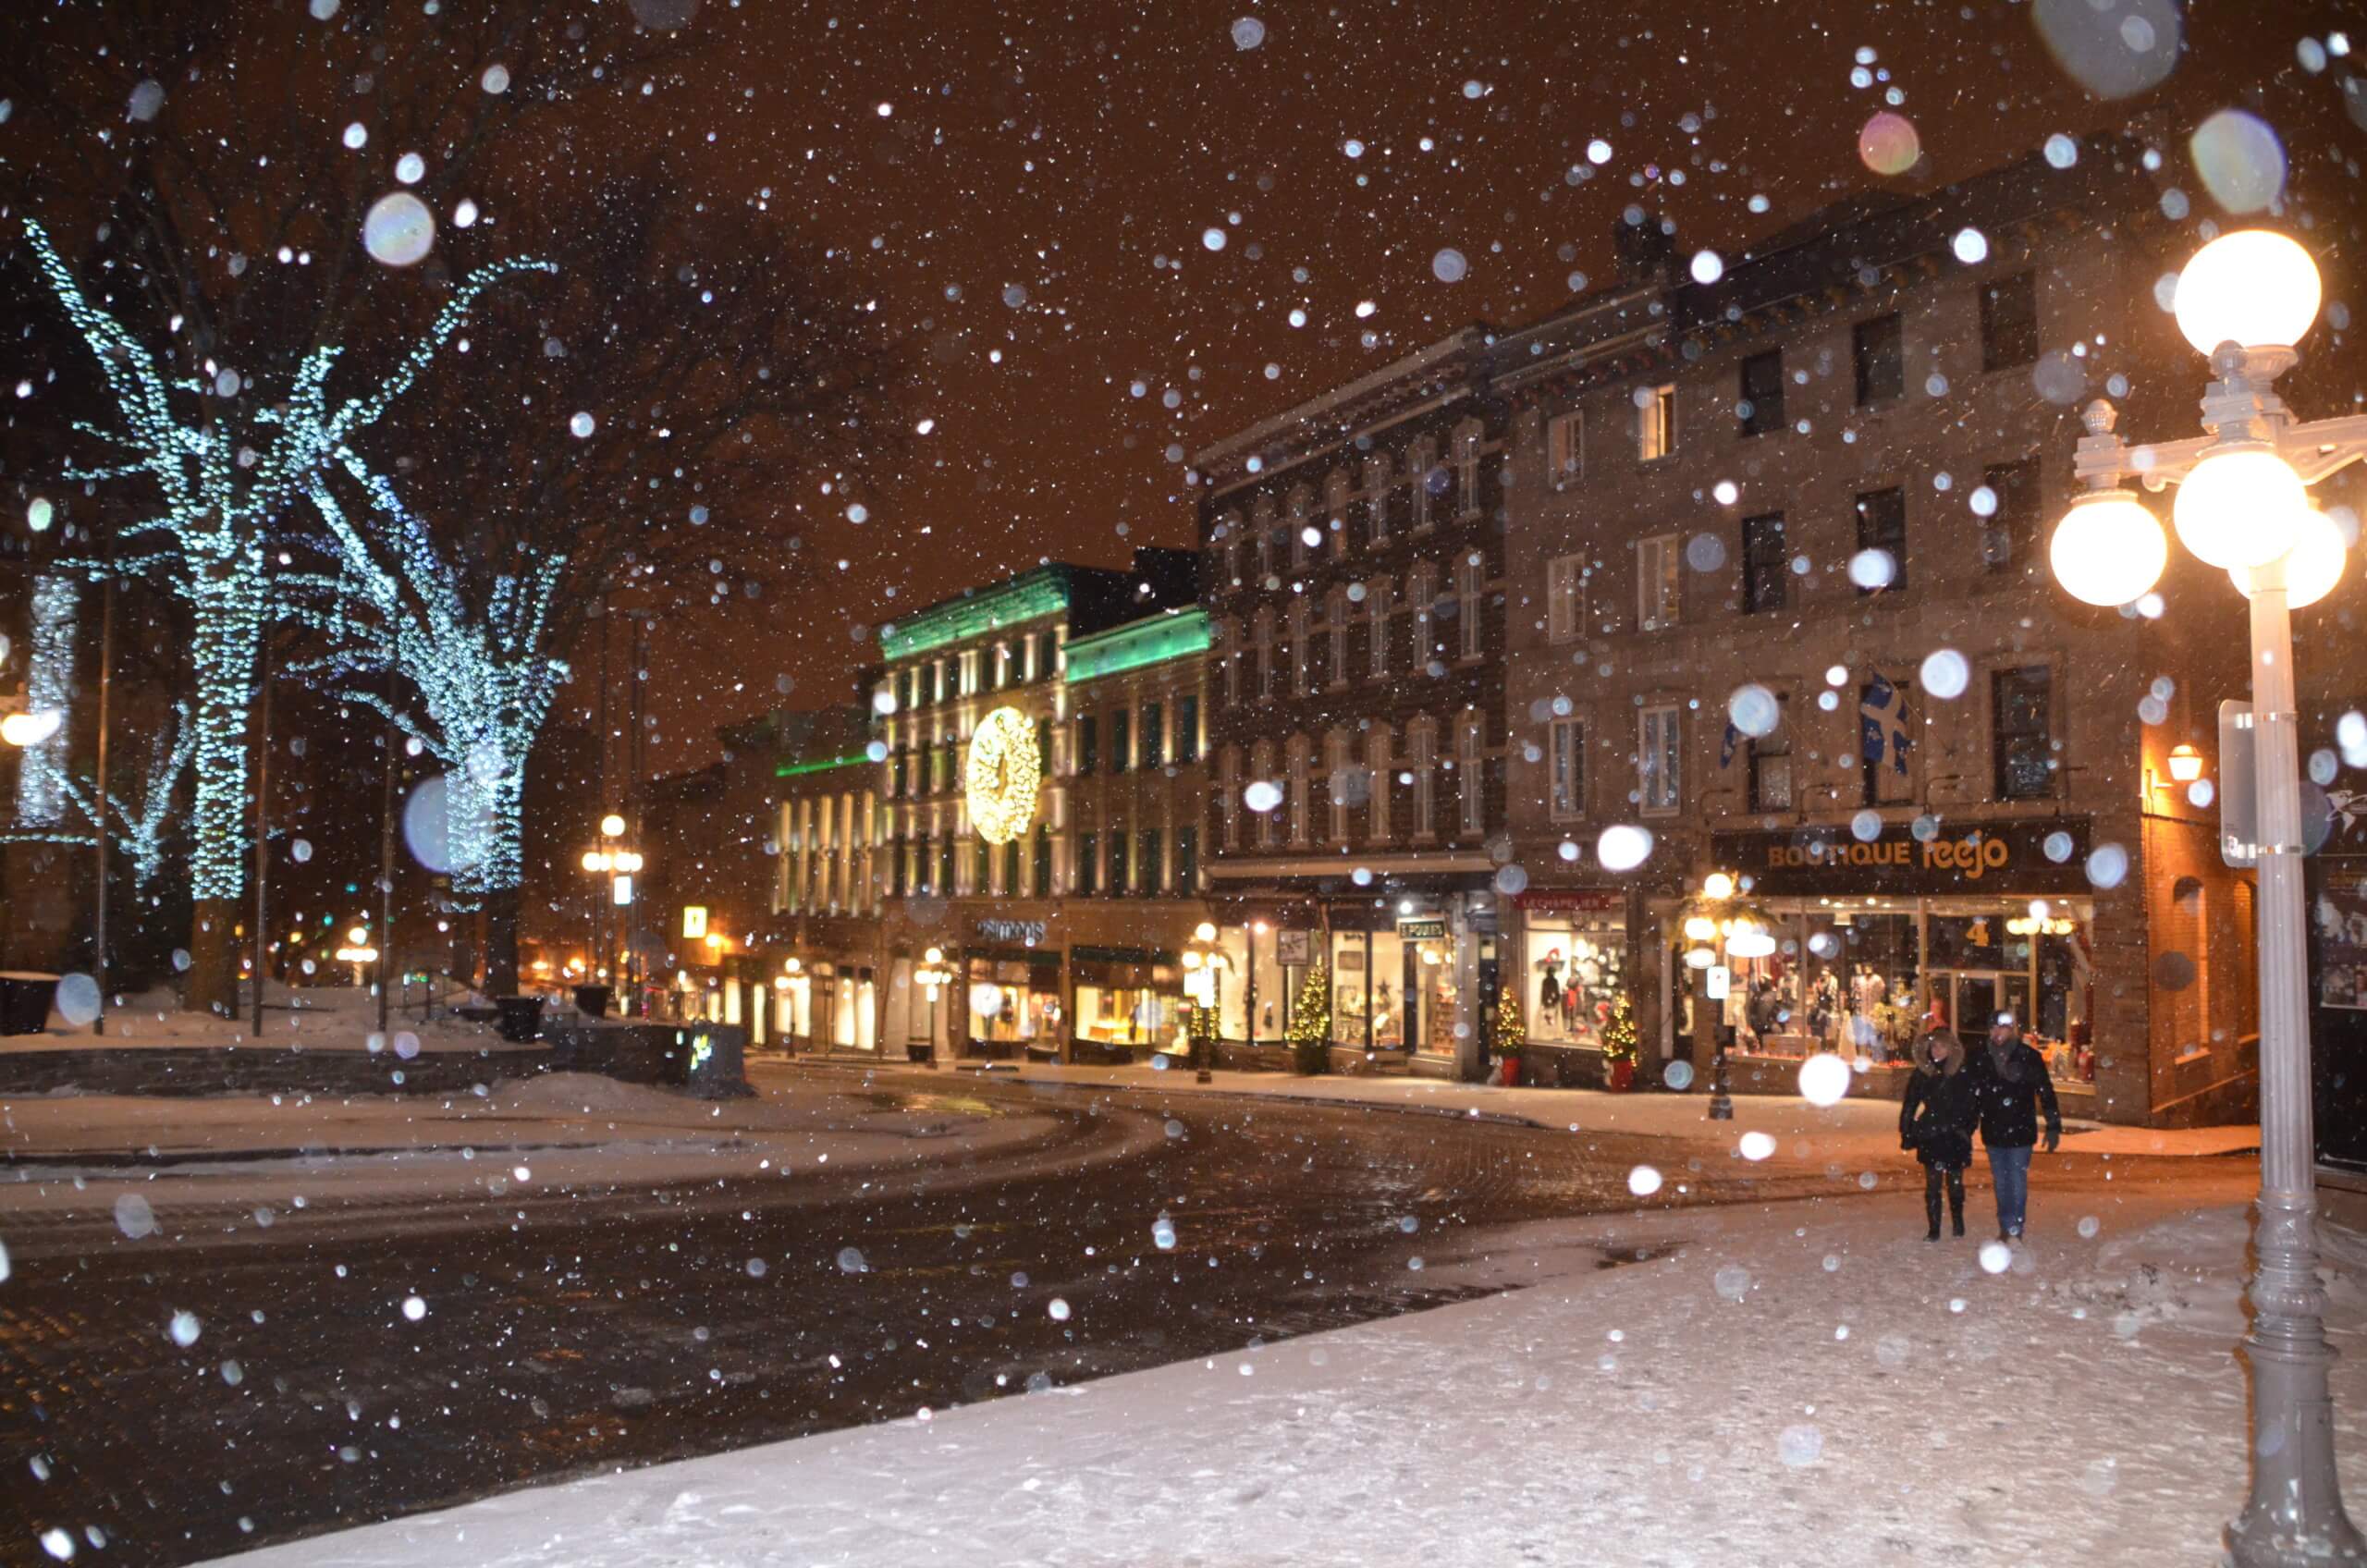 8 REASONS YOU’LL WANT TO EXPERIENCE WINTER IN QUEBEC CITY CANADA